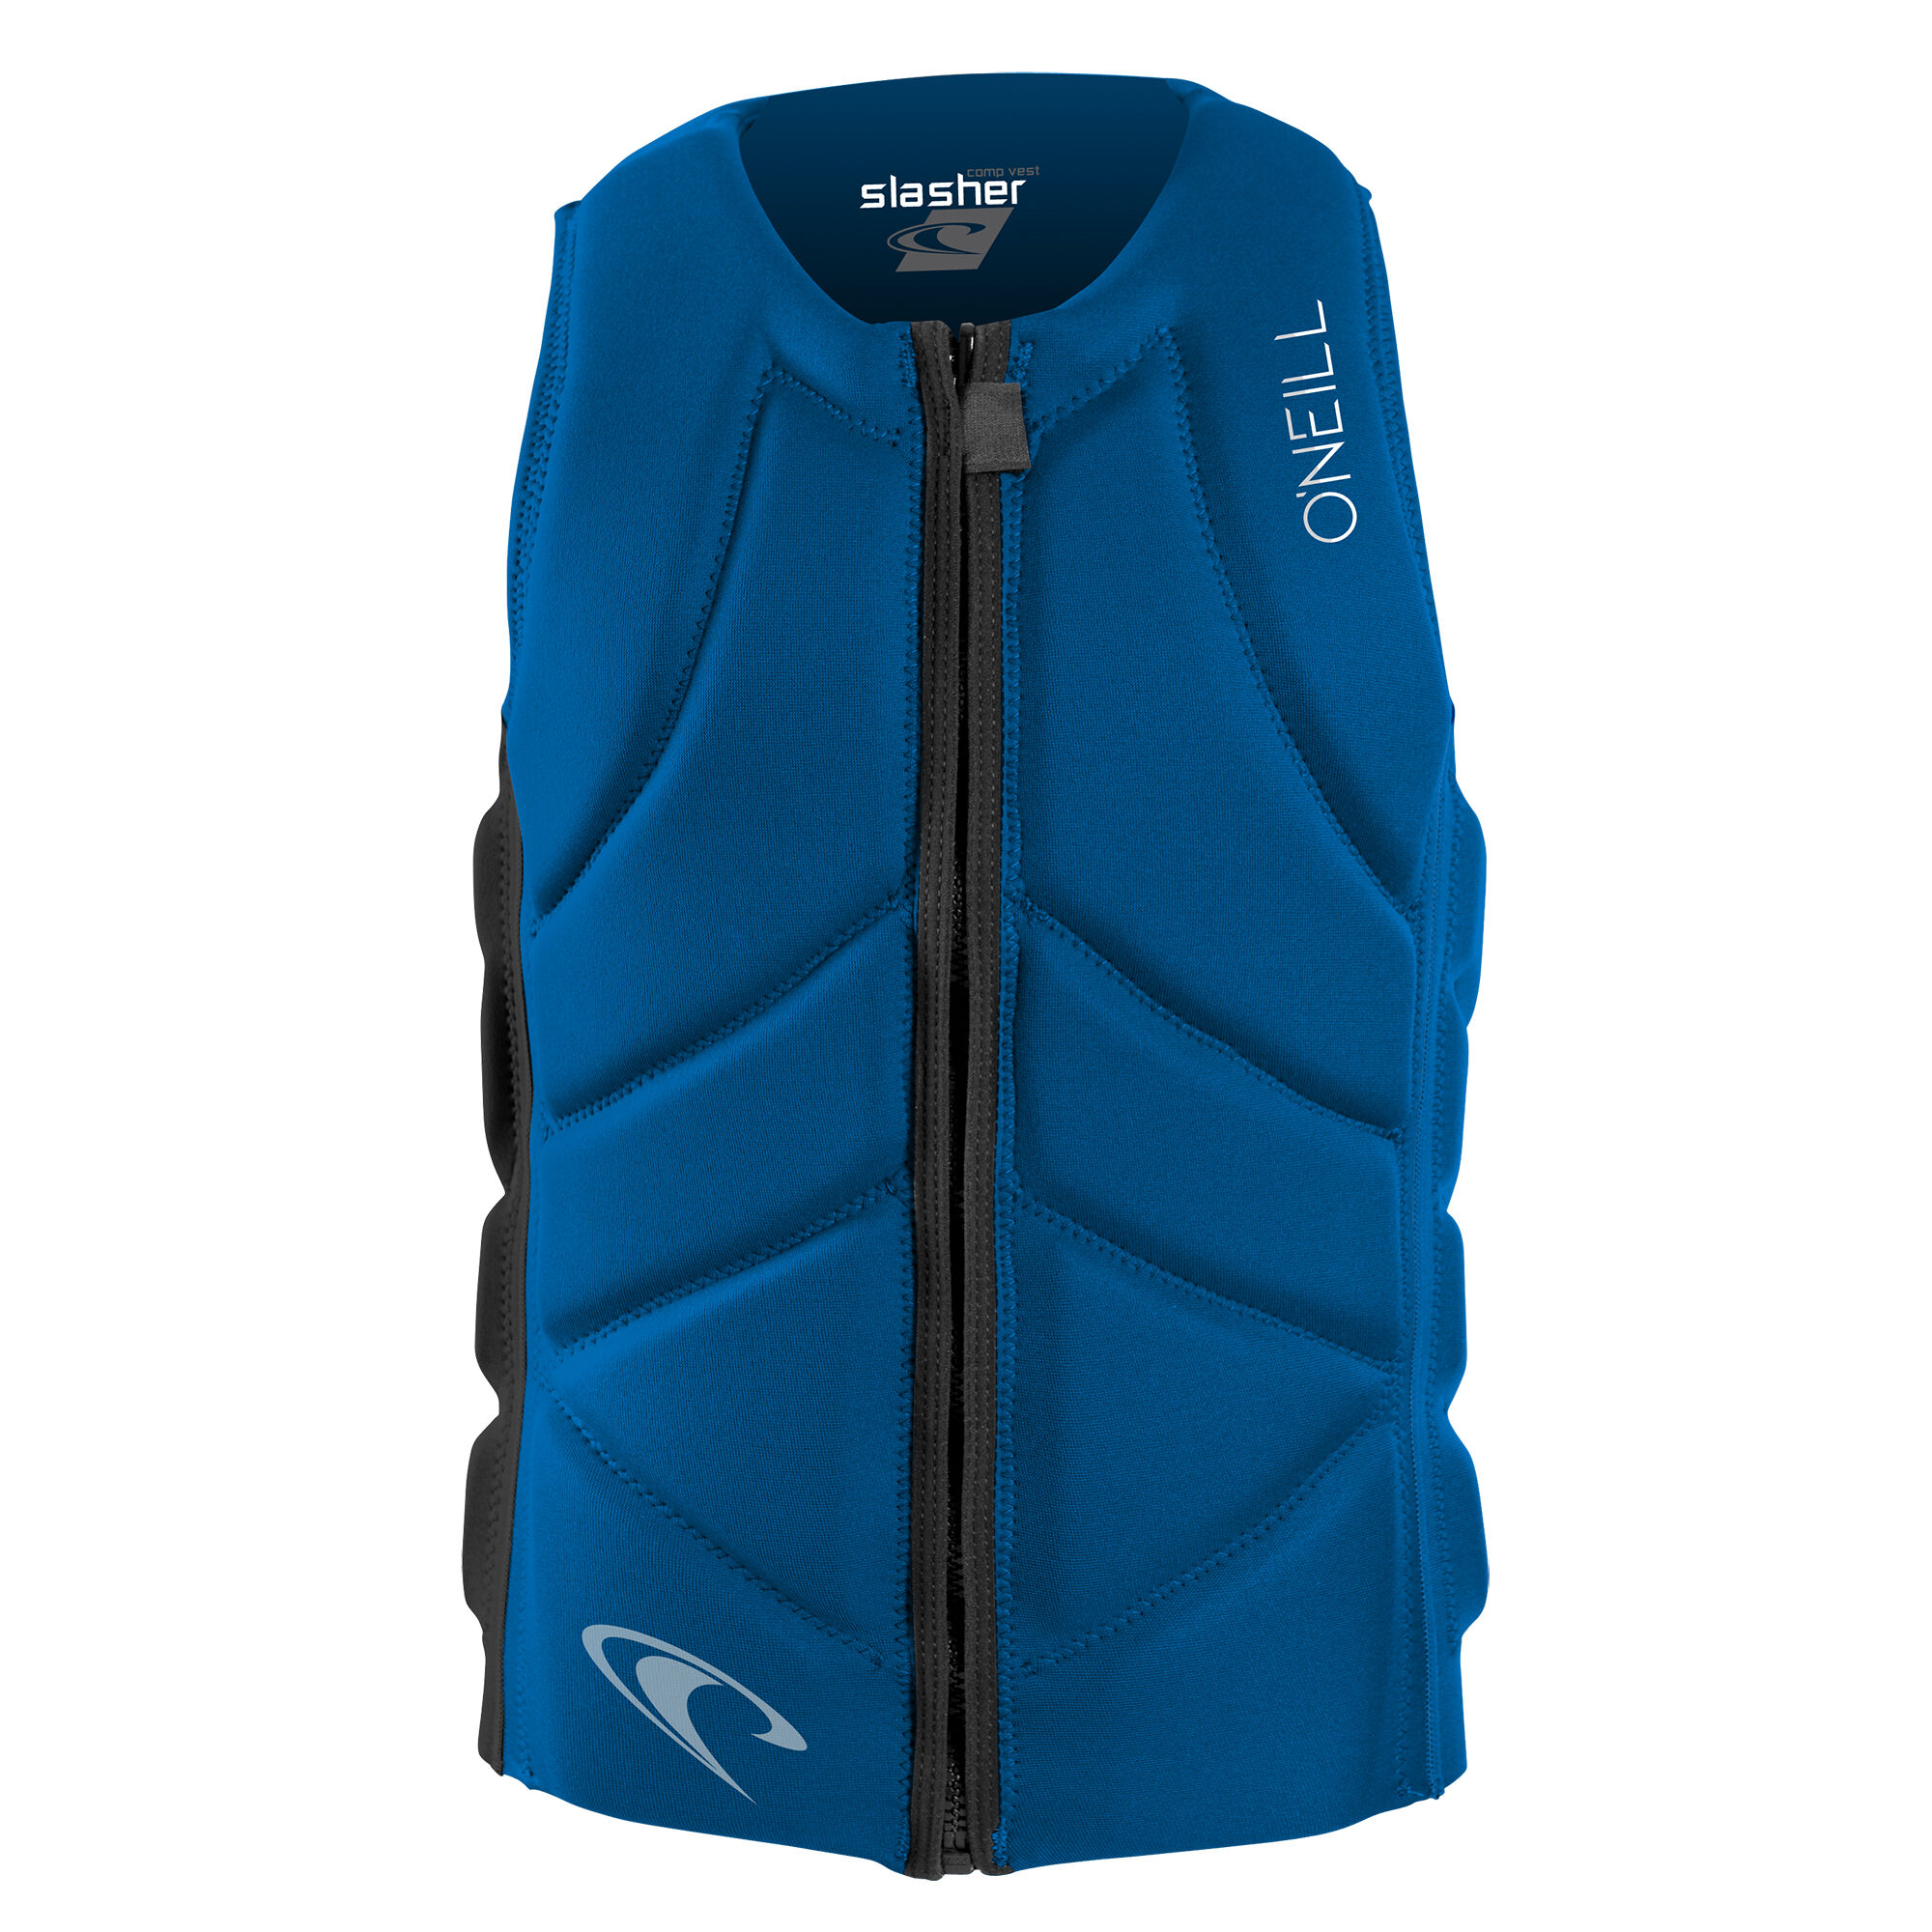 Photos - Life Jacket ONeill O'Neill s Slasher Competition Watersports Vest - Blue/Black - M 4917er9m 